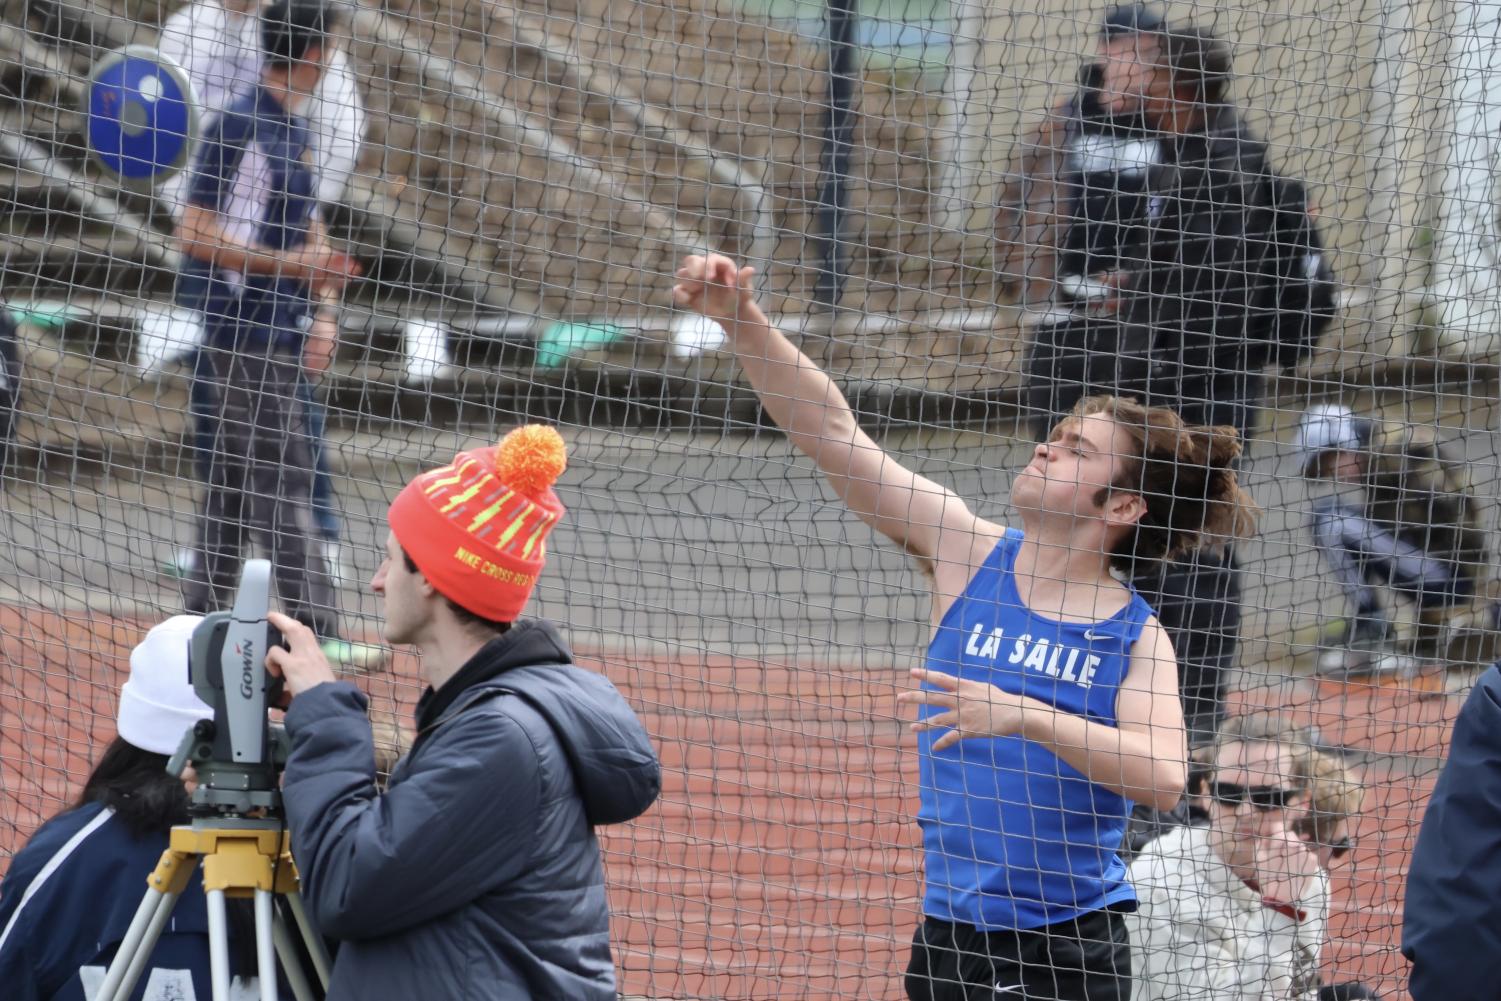 Photo+Story%3A+La+Salle+Track+Competes+in+Wilsonville+Invitational